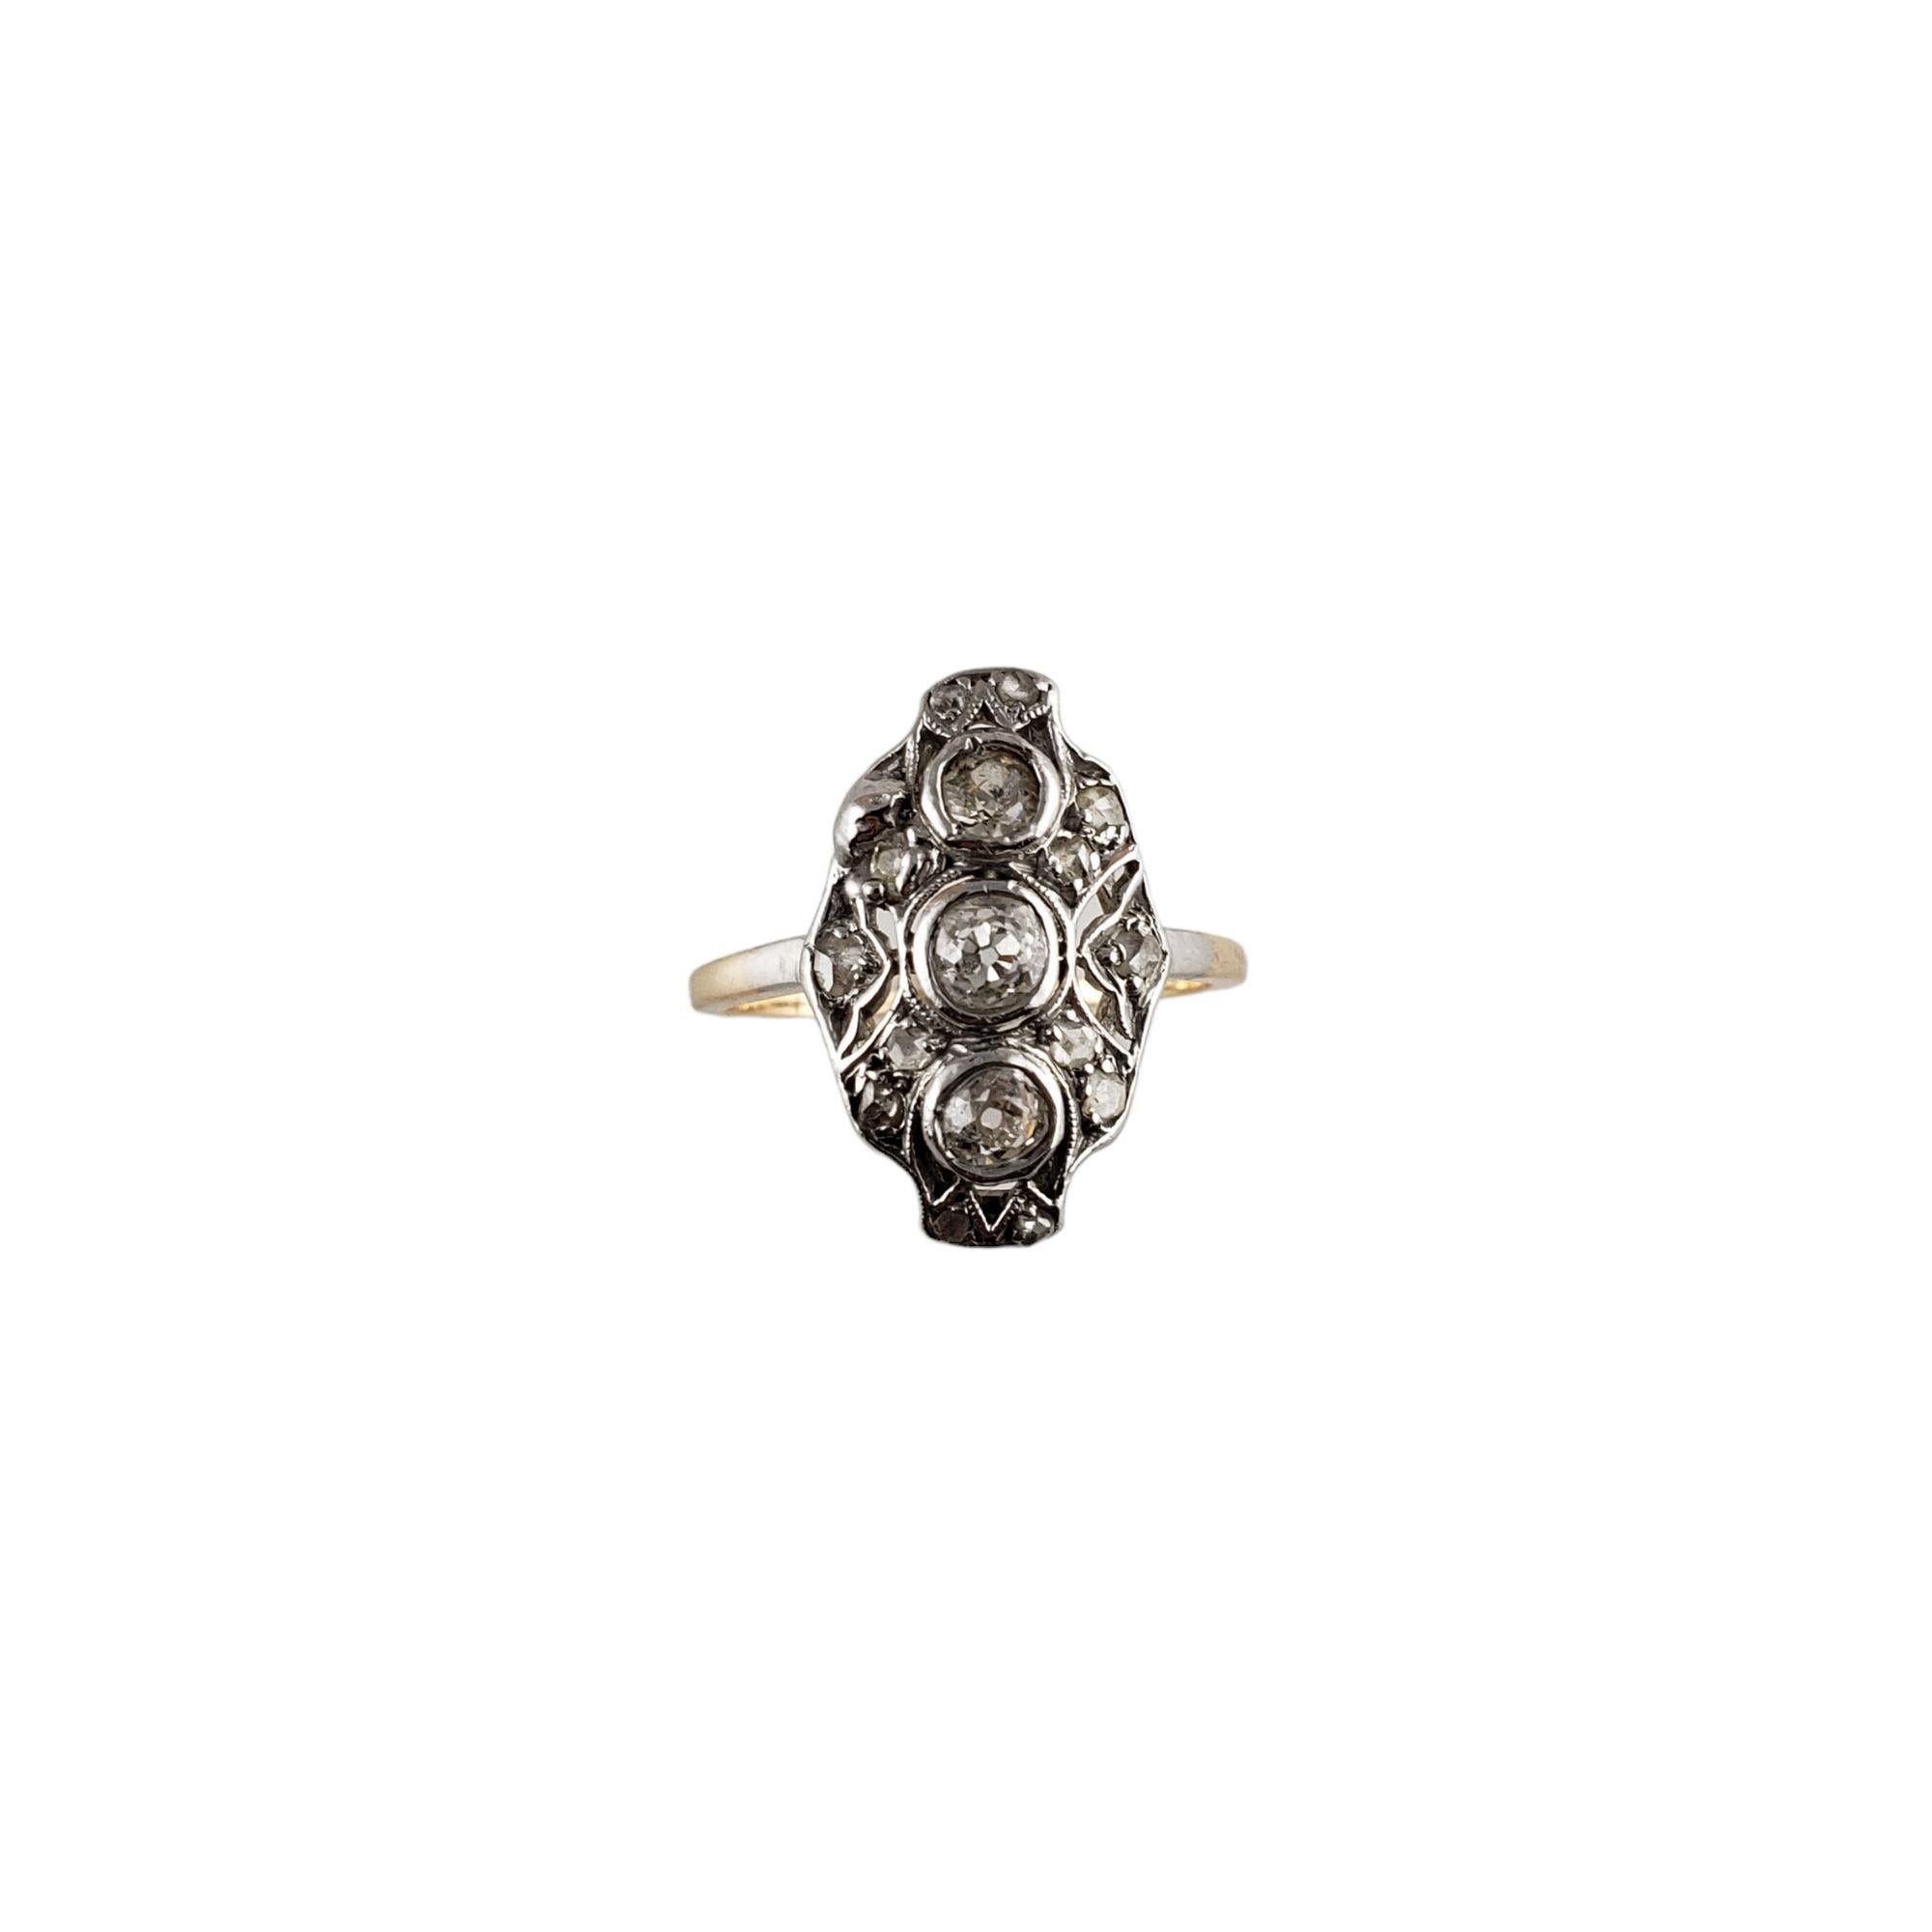 Vintage 10 Karat Two-Tone Gold and Diamond Ring-

This lovely ring features three round European cut diamonds and 13 rose cut diamonds set in beautifully detailed 10K white and yellow gold. Top of ring measures 17 mm x 11 mm. Shank: 1